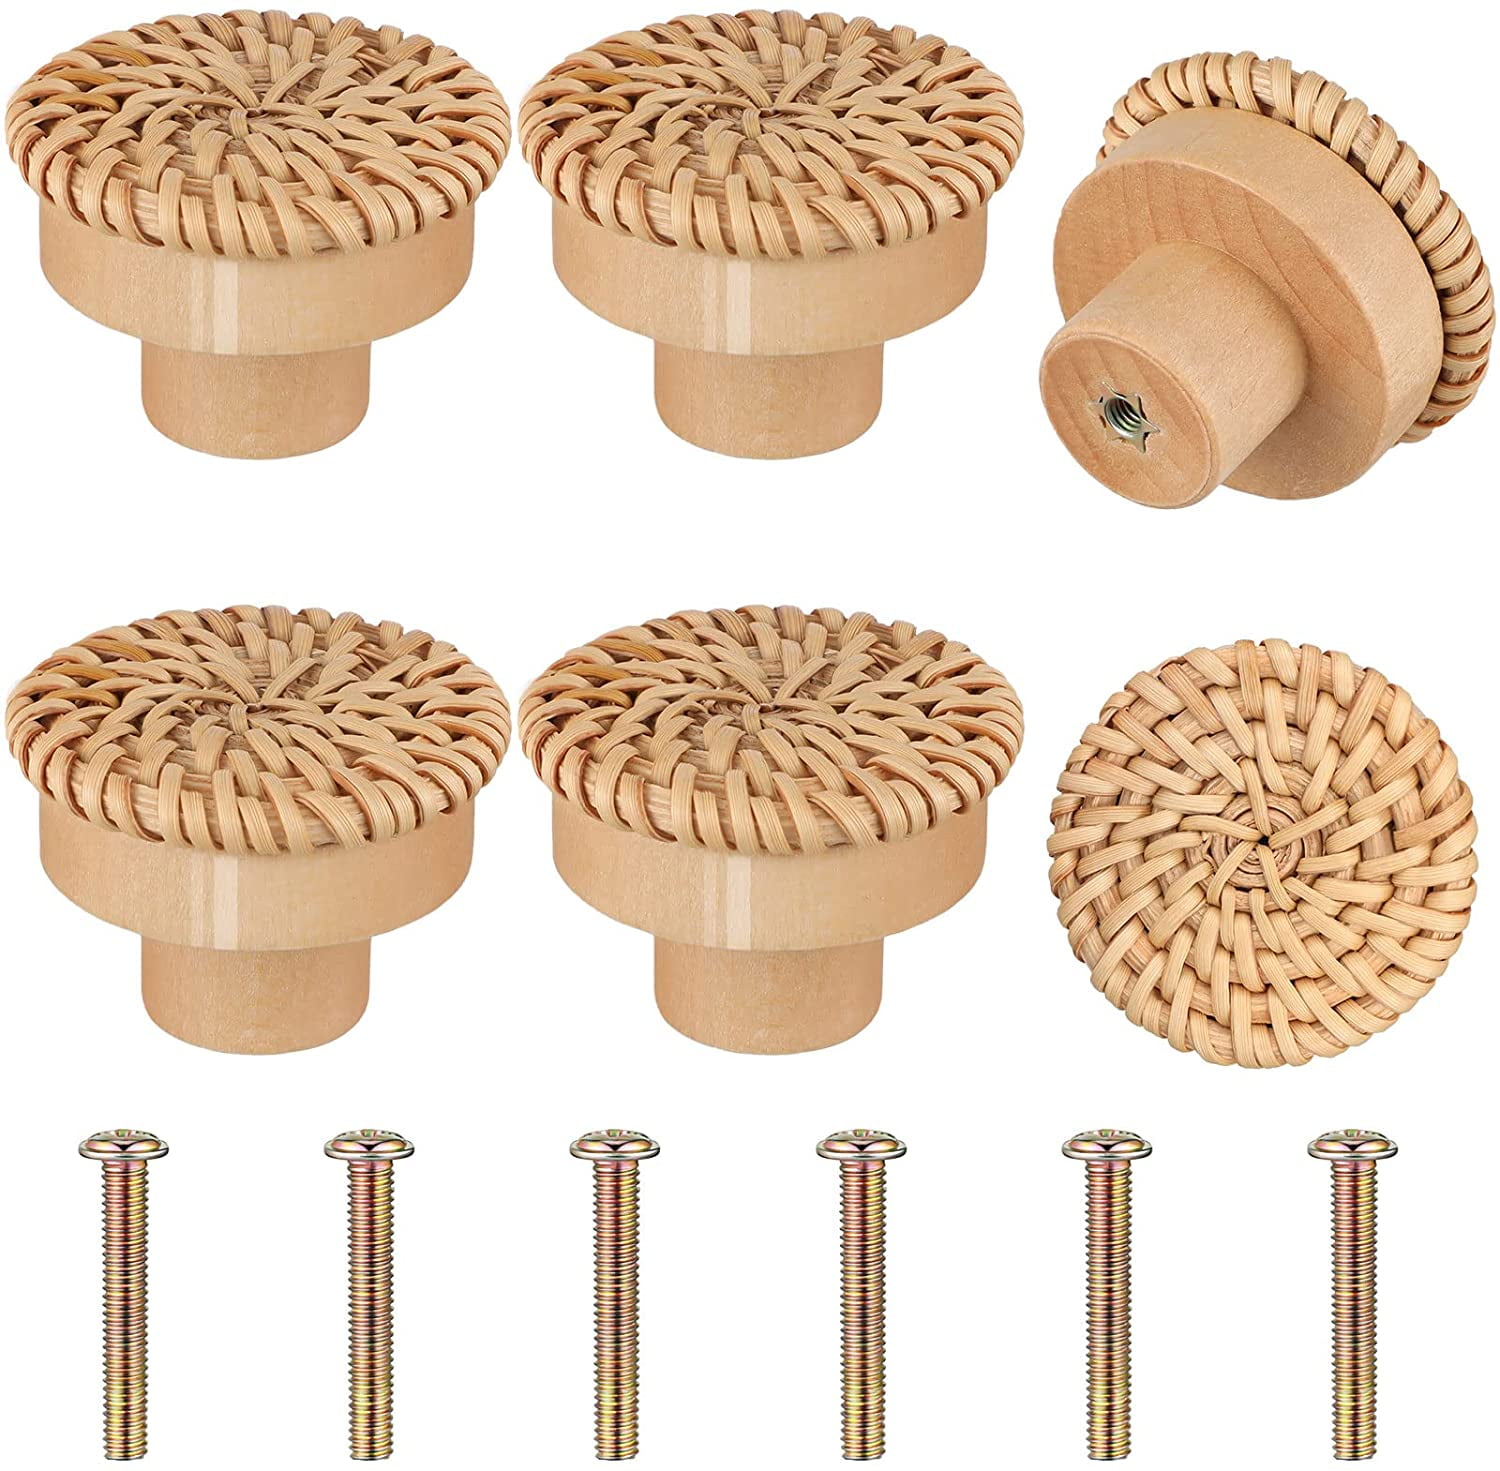 AMERICAN DREAM PRODUCTS Oak Frame Knobs K001 4-Pack